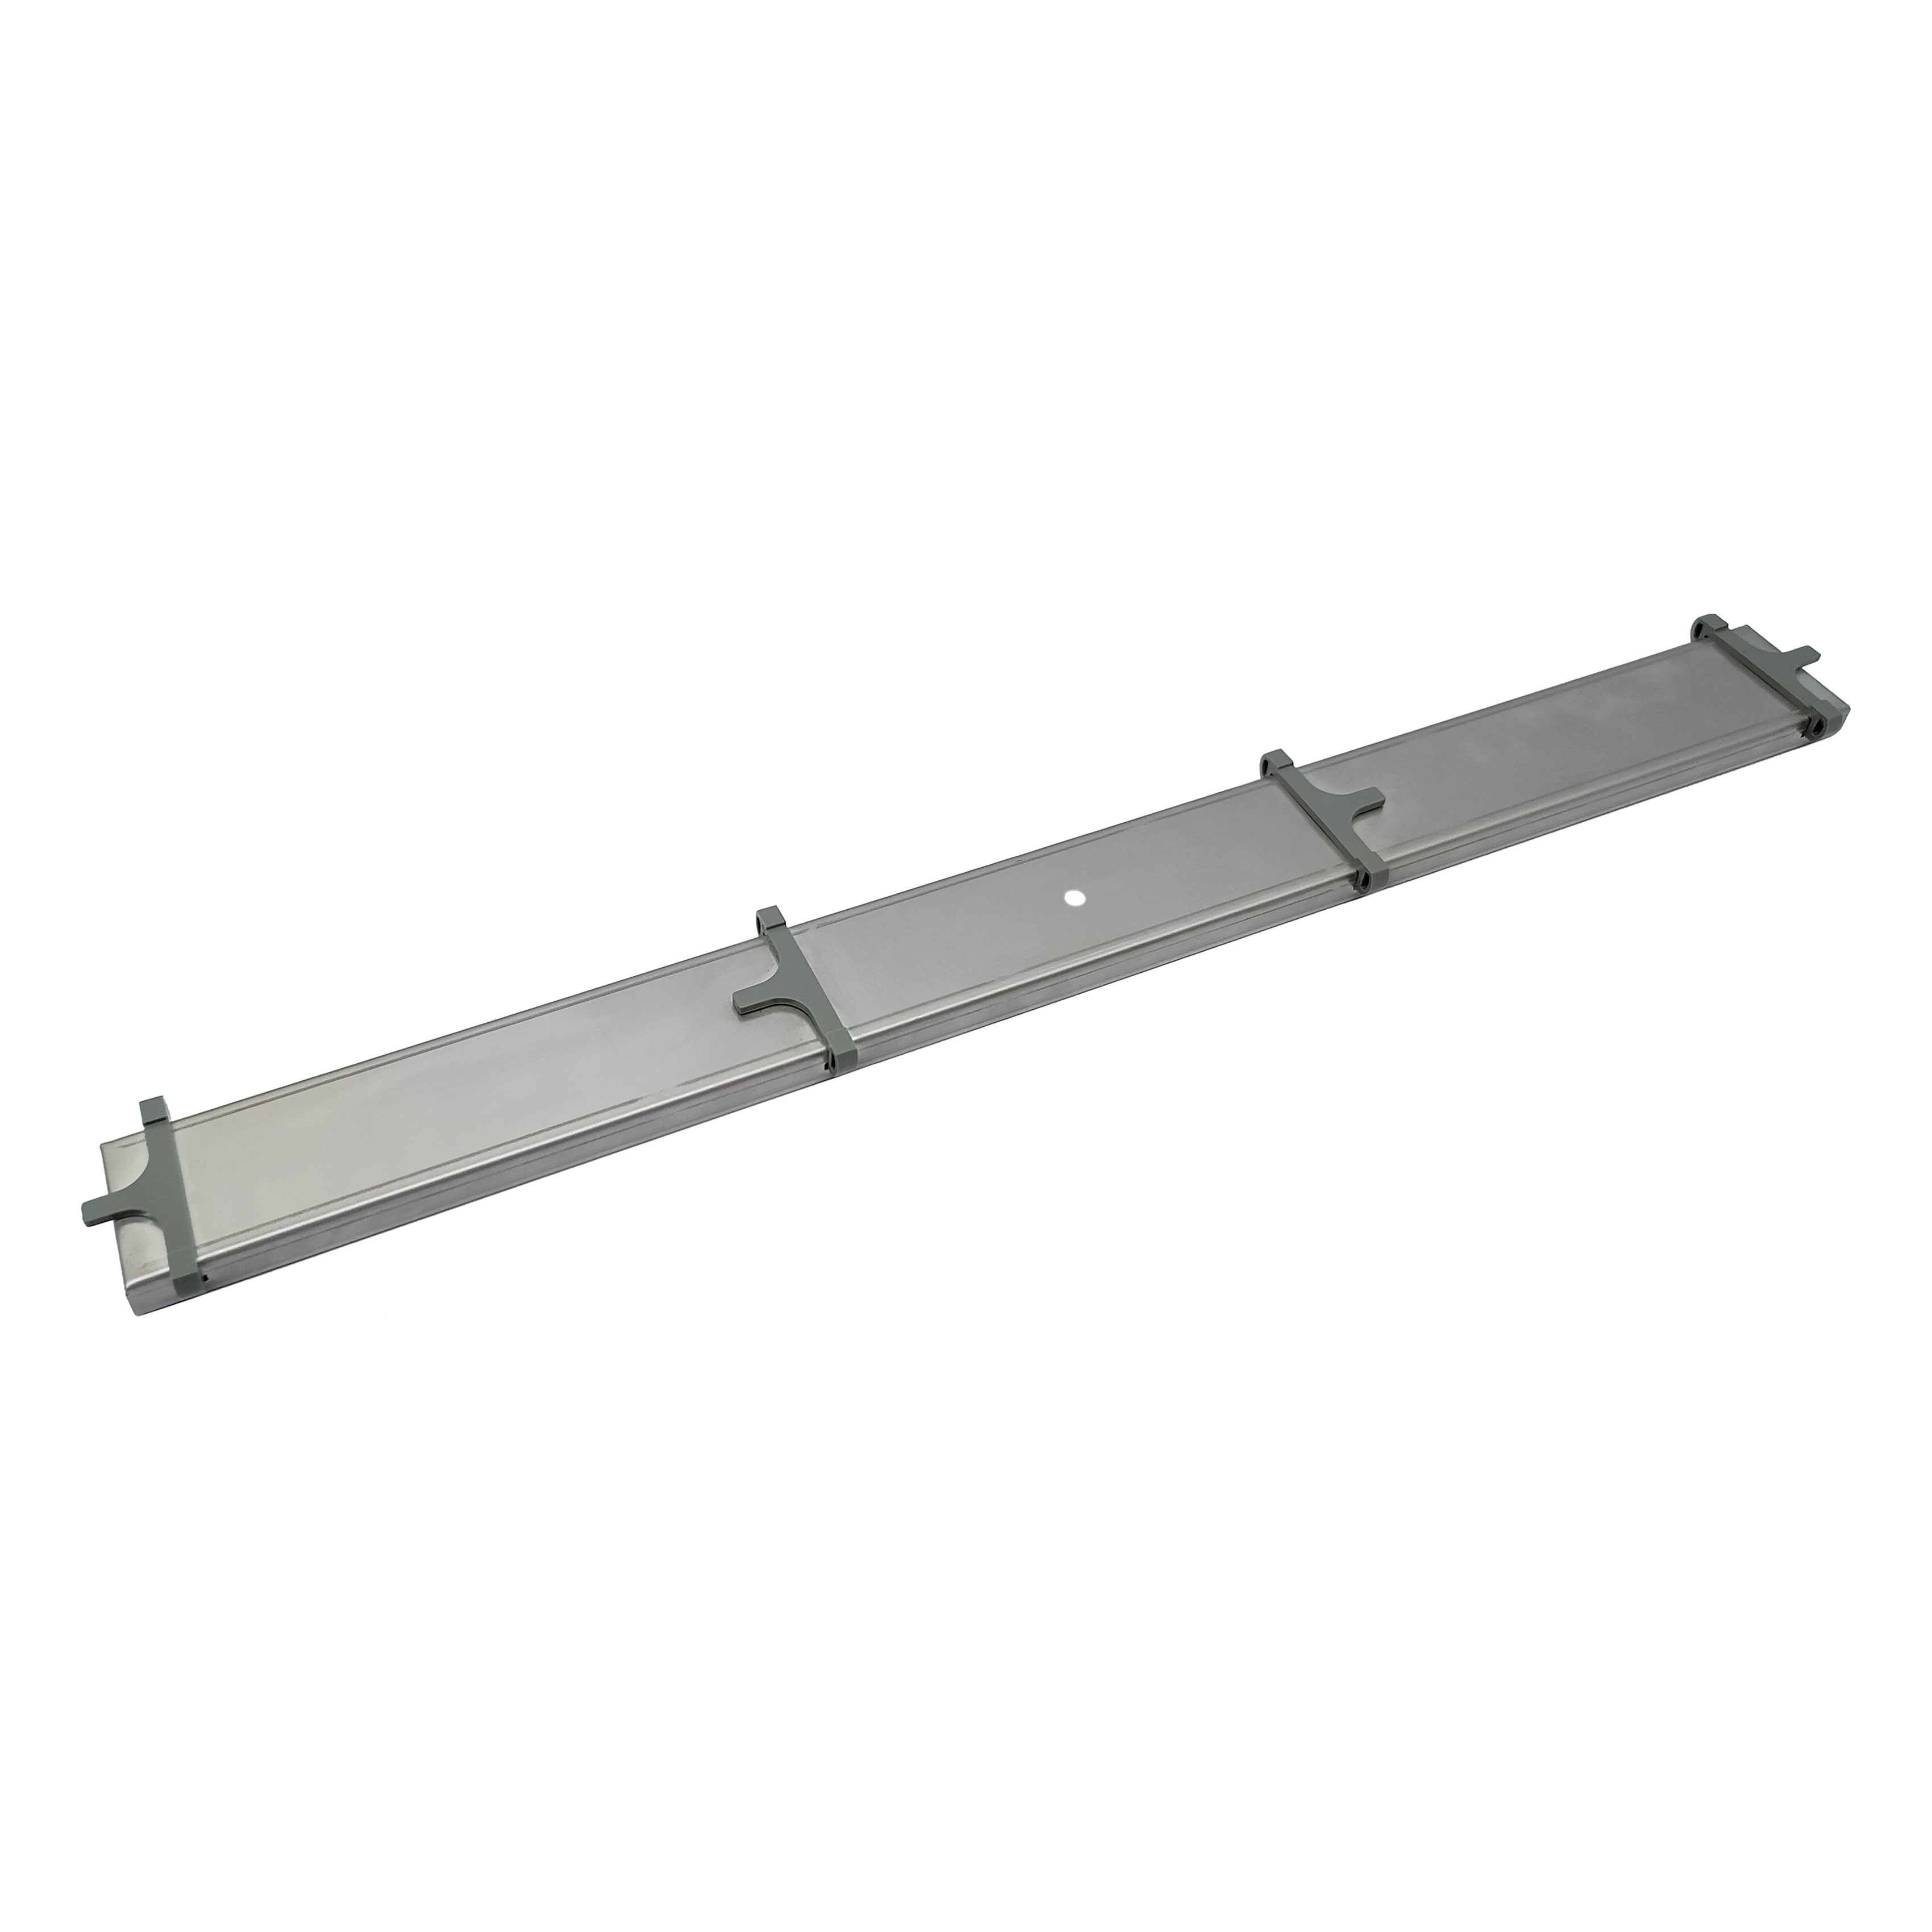 Stainless steel Linear Shower Drain (Tile-in) - Aluids Usa